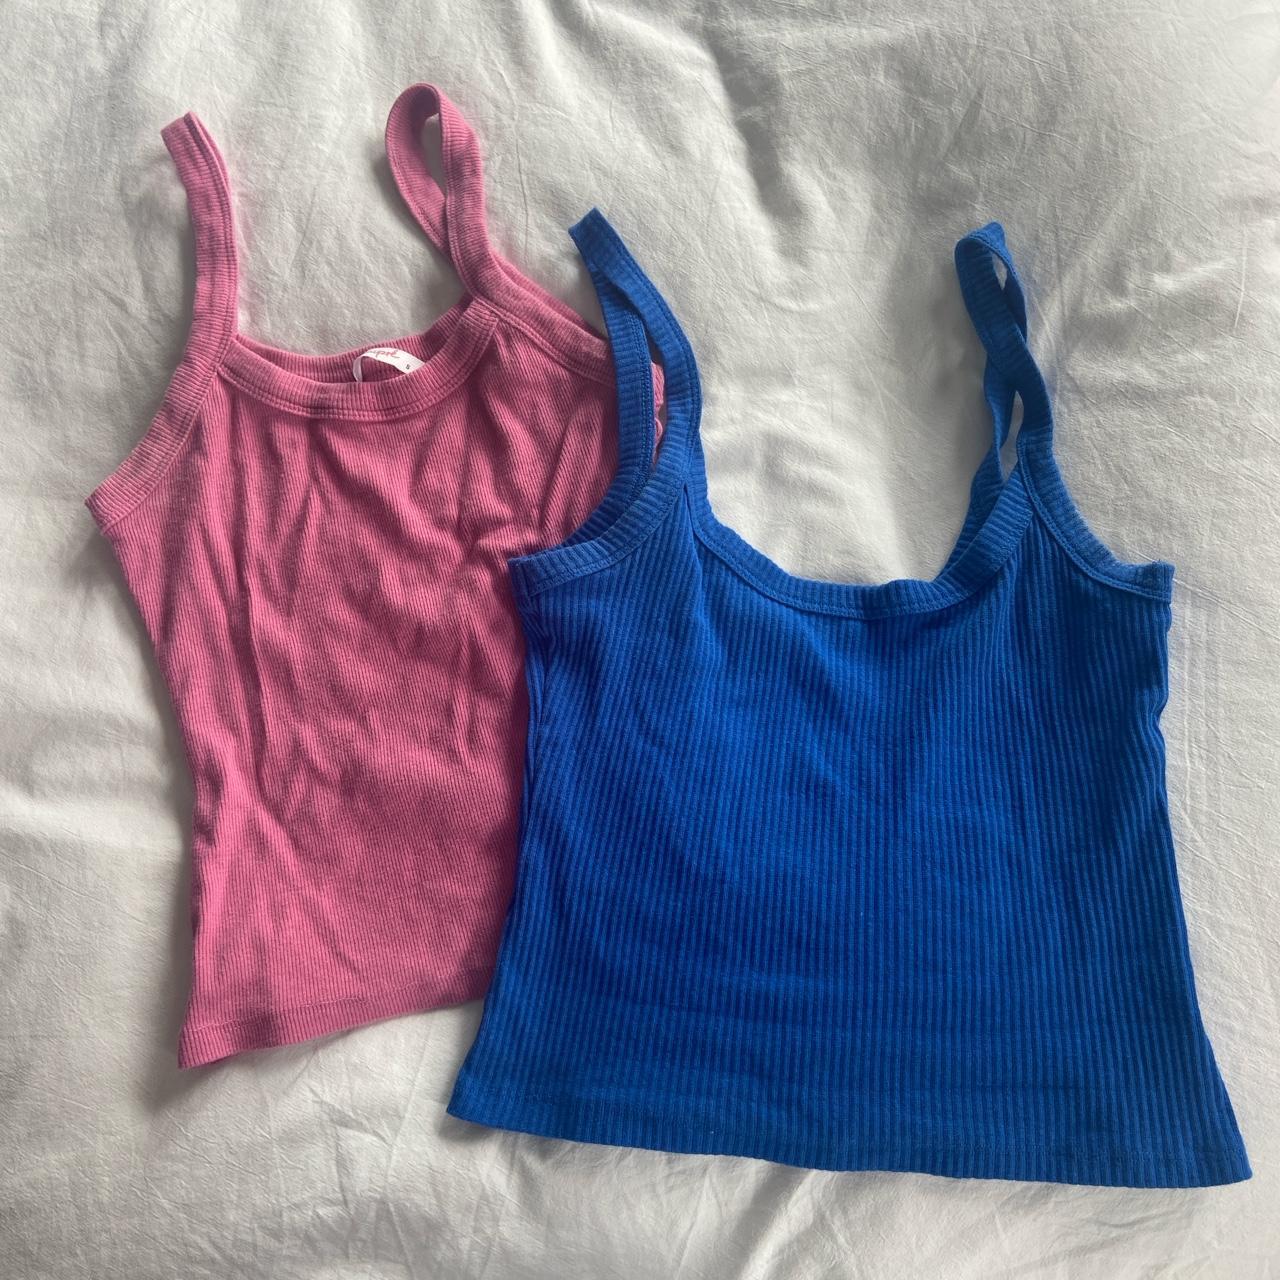 supre riri tank tops both size small $17 for both - Depop